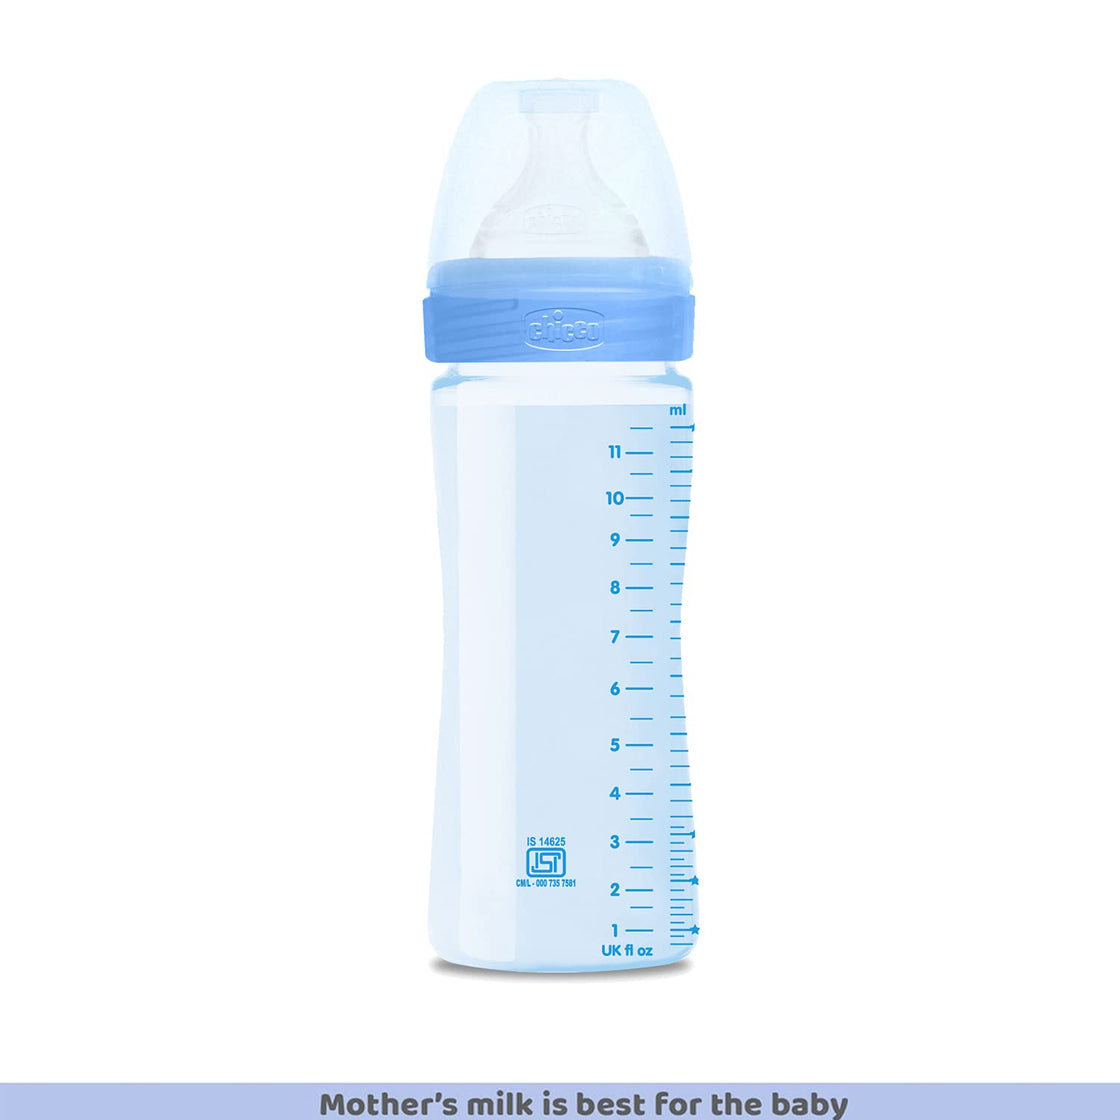 Chicco Well-Being Baby Coloured Feeding Bottle 330ml, Blue